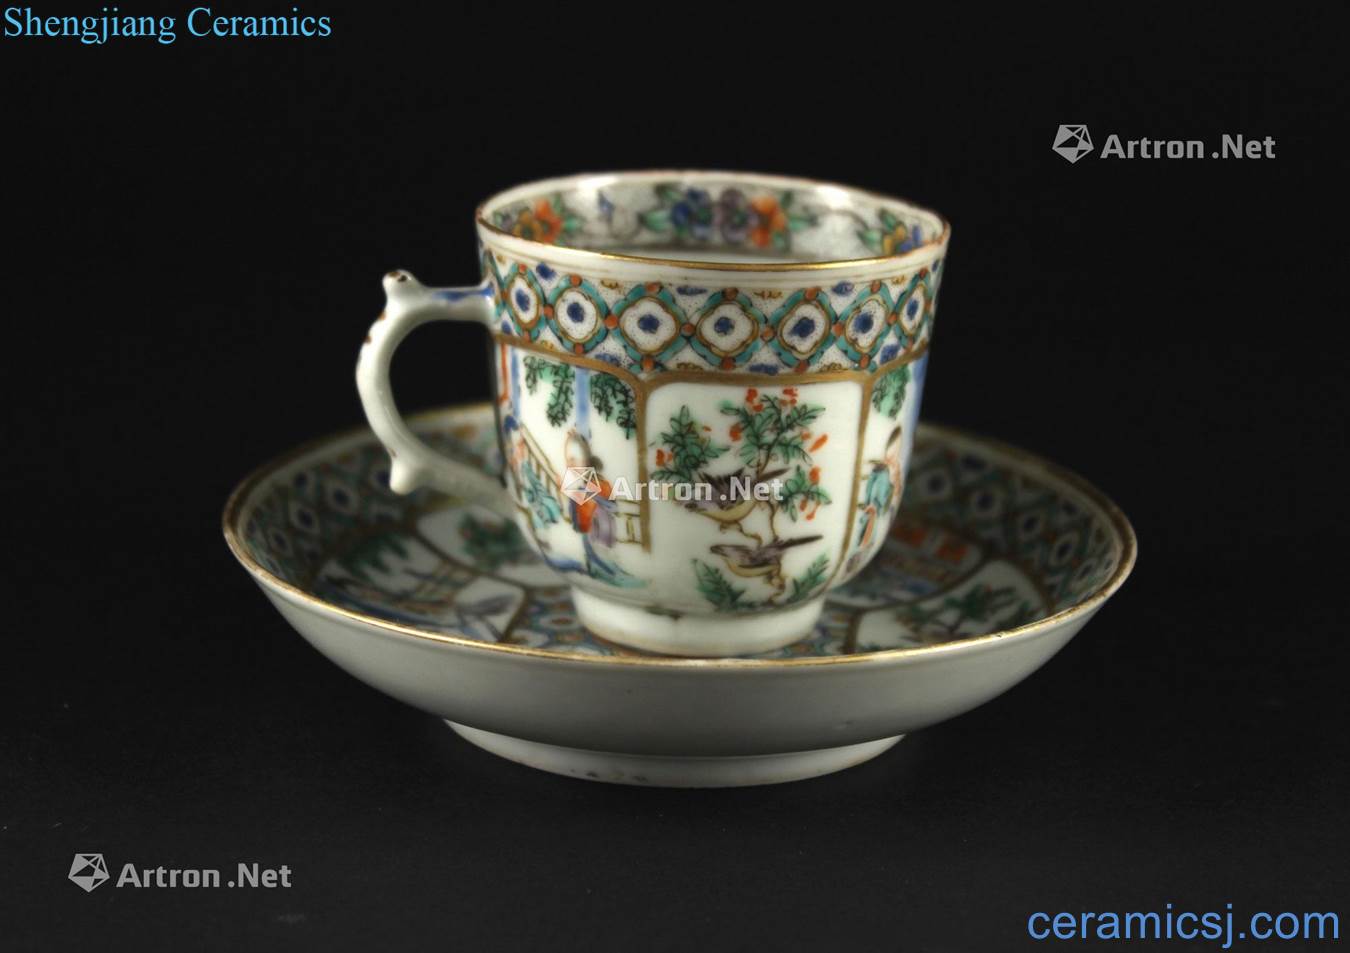 The late qing dynasty colorful paint medallion characters grain export porcelain cups and saucers